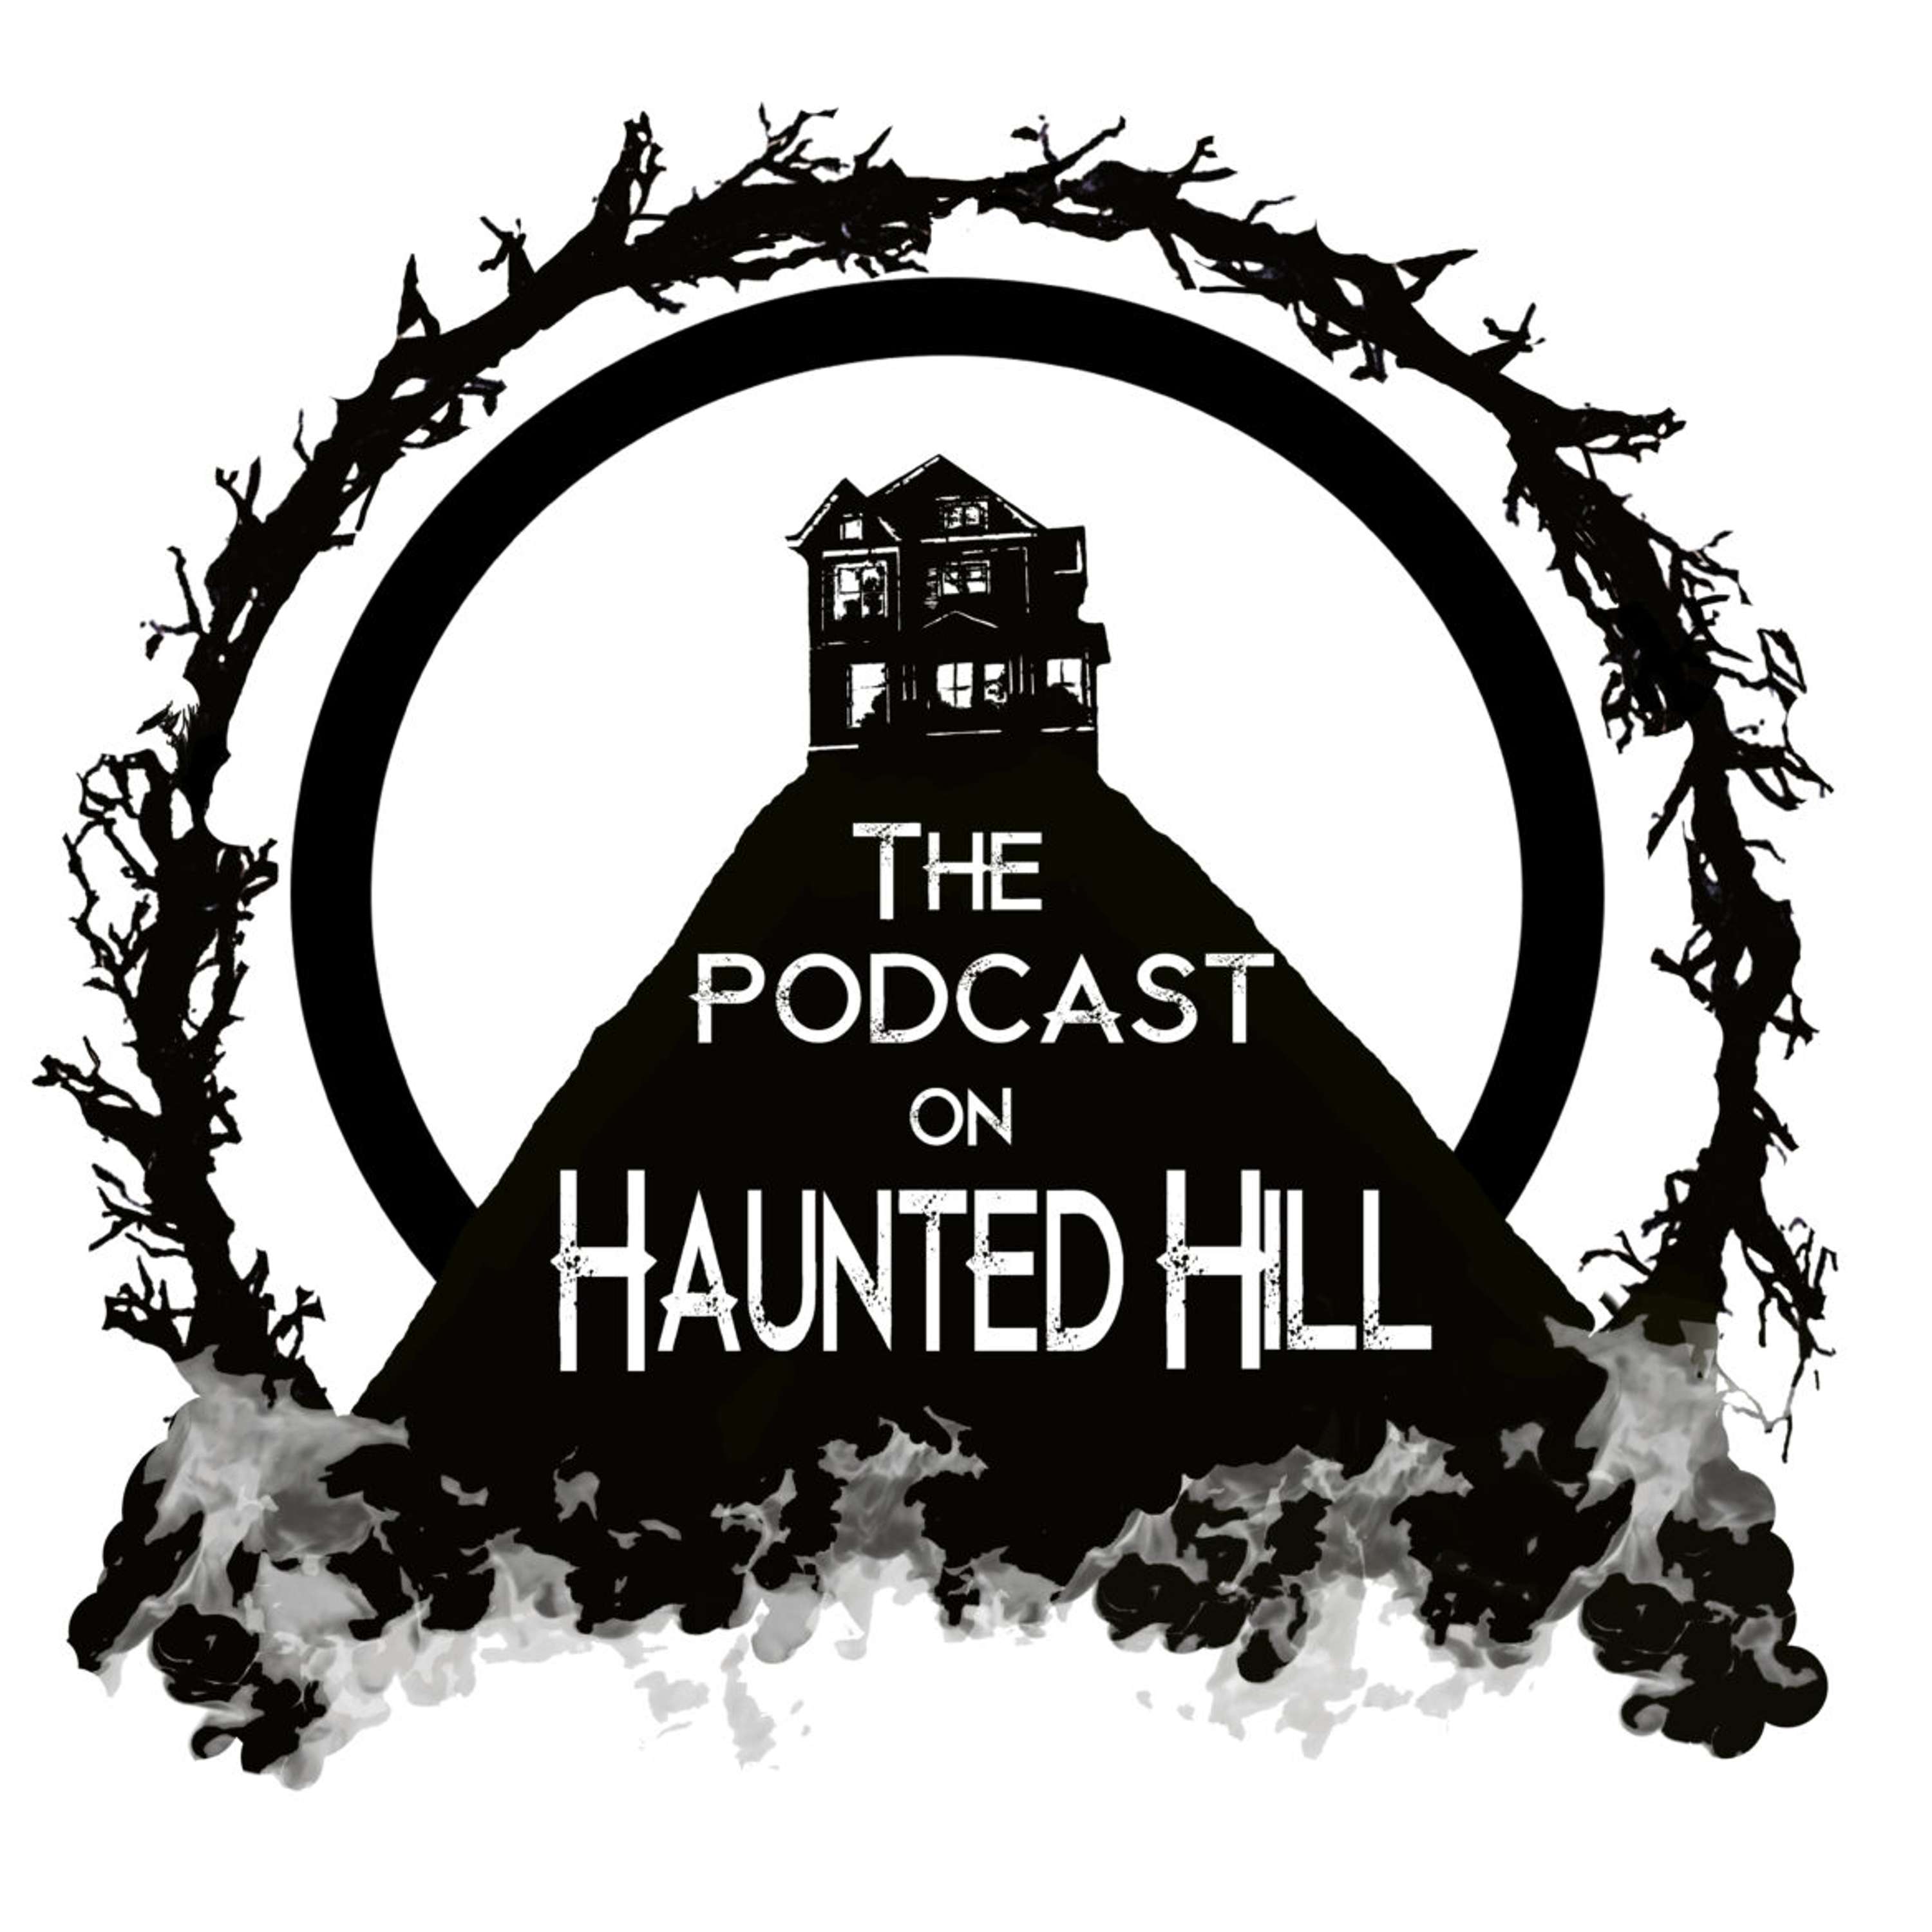 THE PODCAST ON HAUNTED HILL EPISODE 112 – LABYRINTH AND TEENWOLF